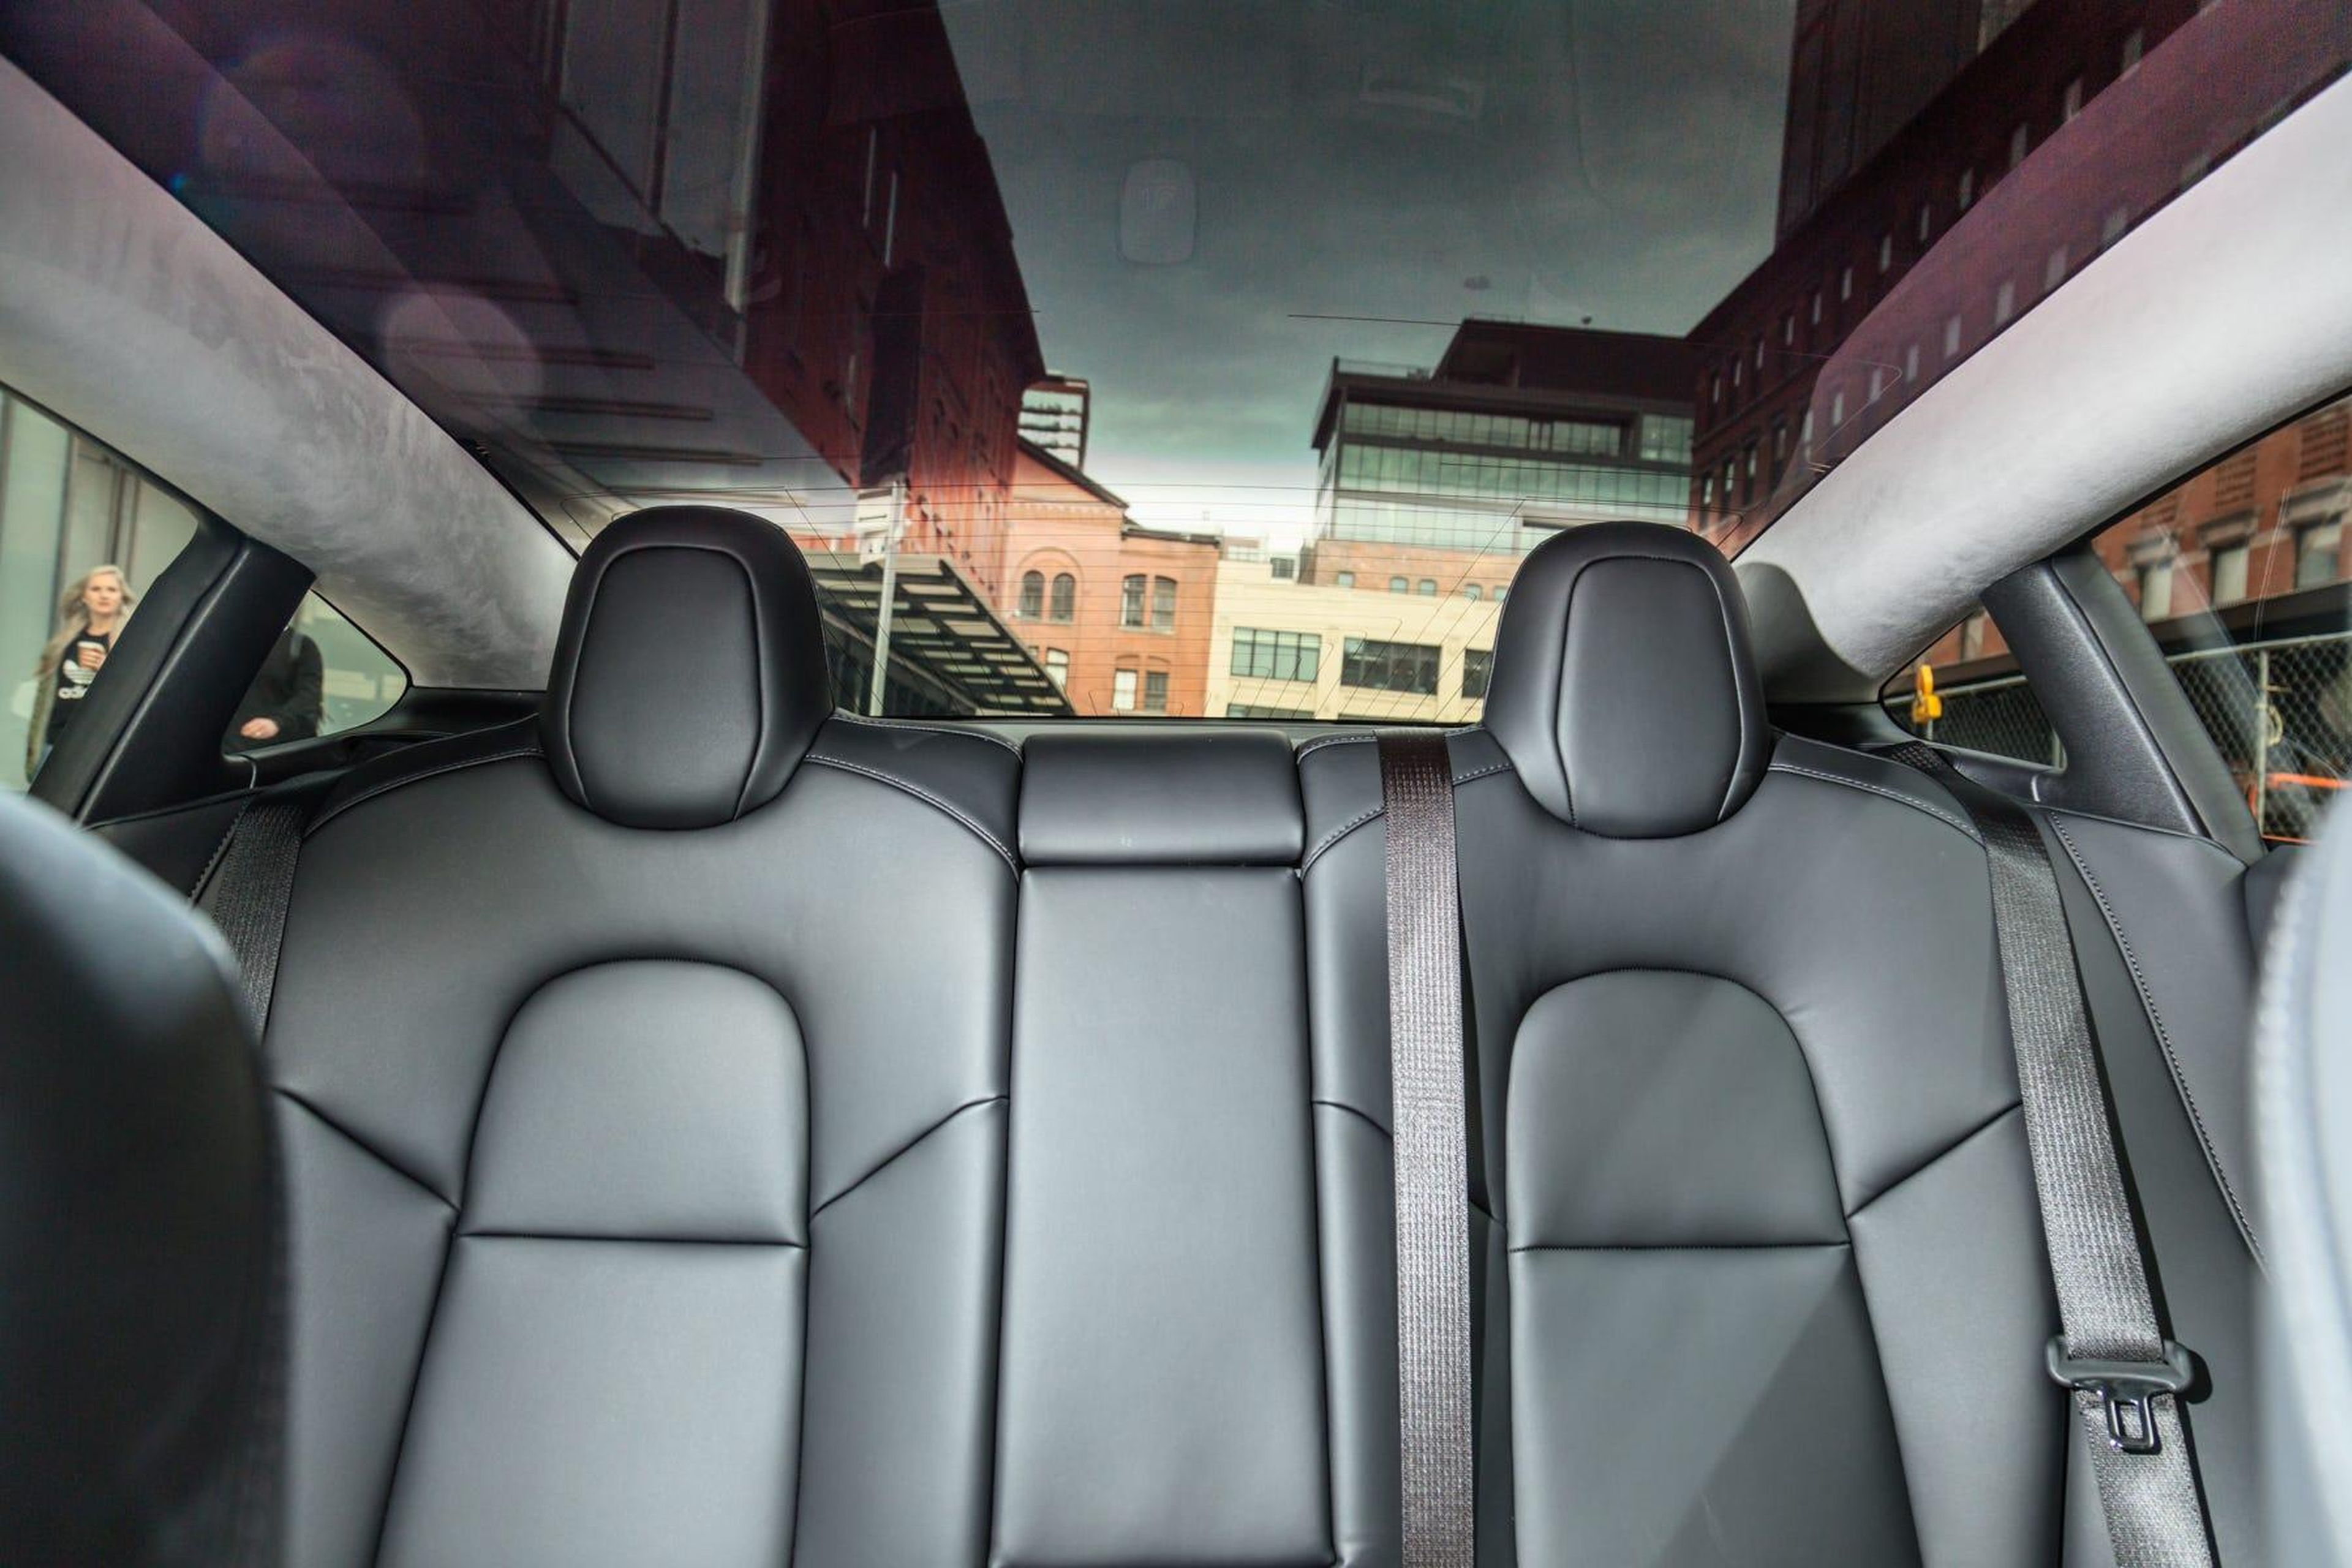 With the Model 3, you get smaller back seats, but you also get a show-stopping panoramic glass roof that runs from the windshield to the rear hatch.